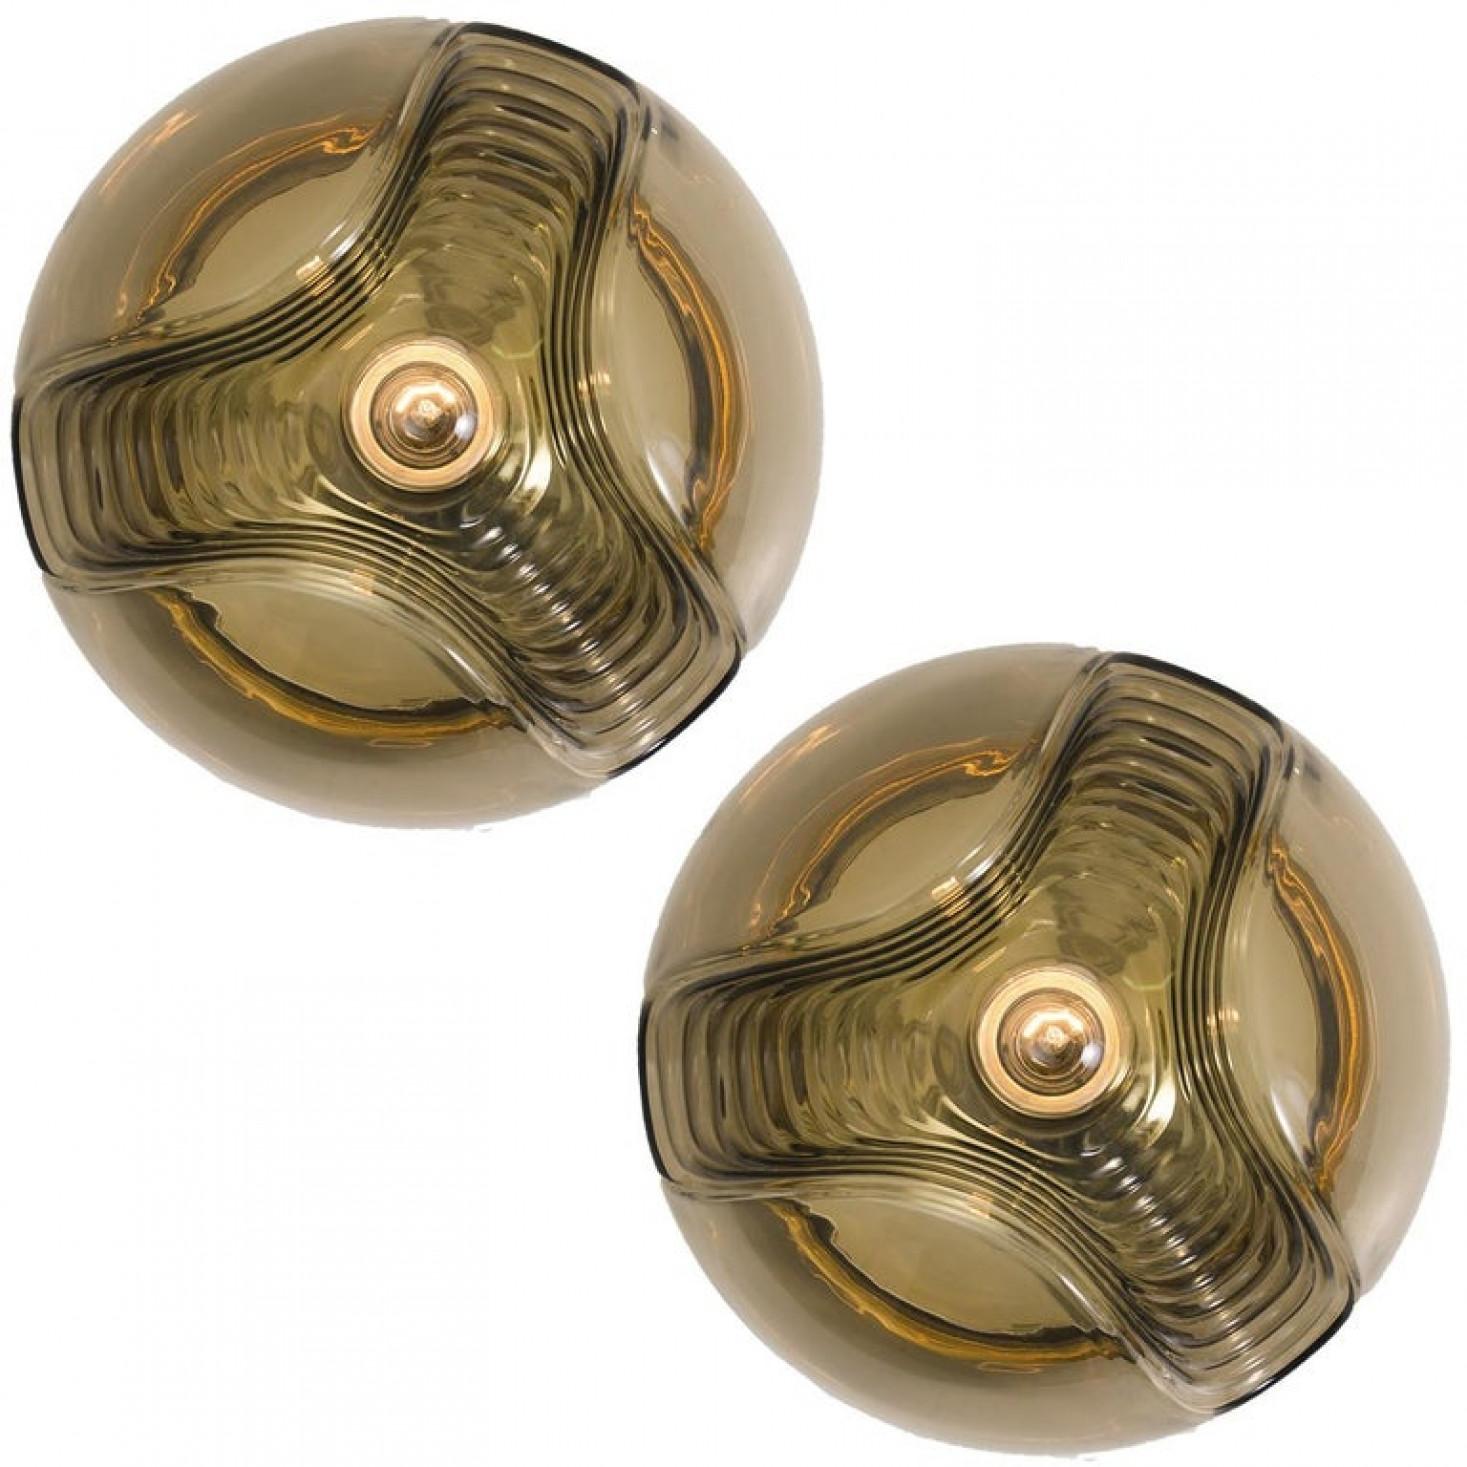 Pair of Koch & Lowy Smoked Glass Wall Sconces/Lights by Peill Putzler, 1970 For Sale 6